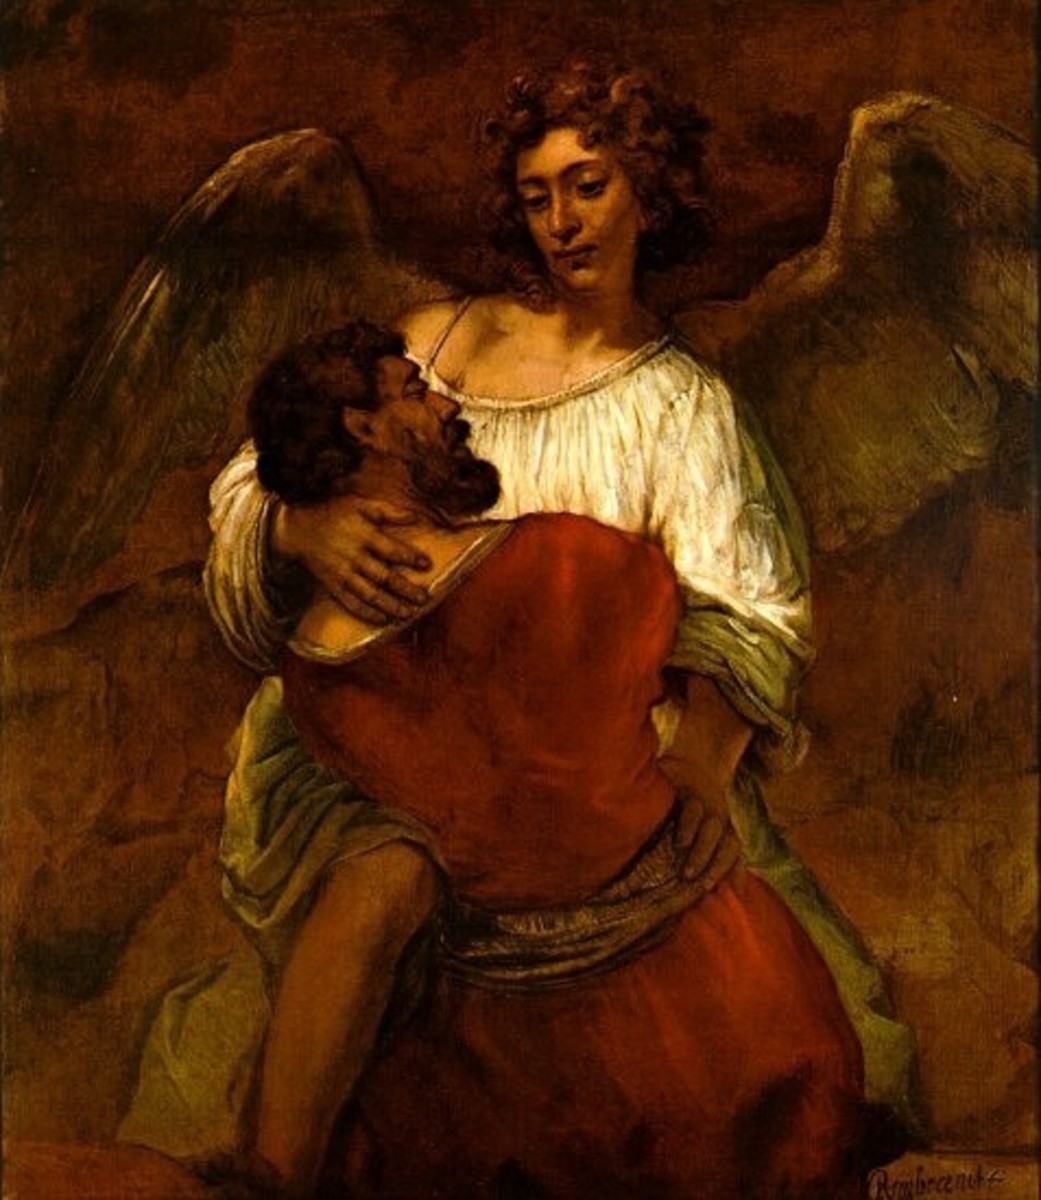 Jacob wrestling with the Angel by Rembrandt